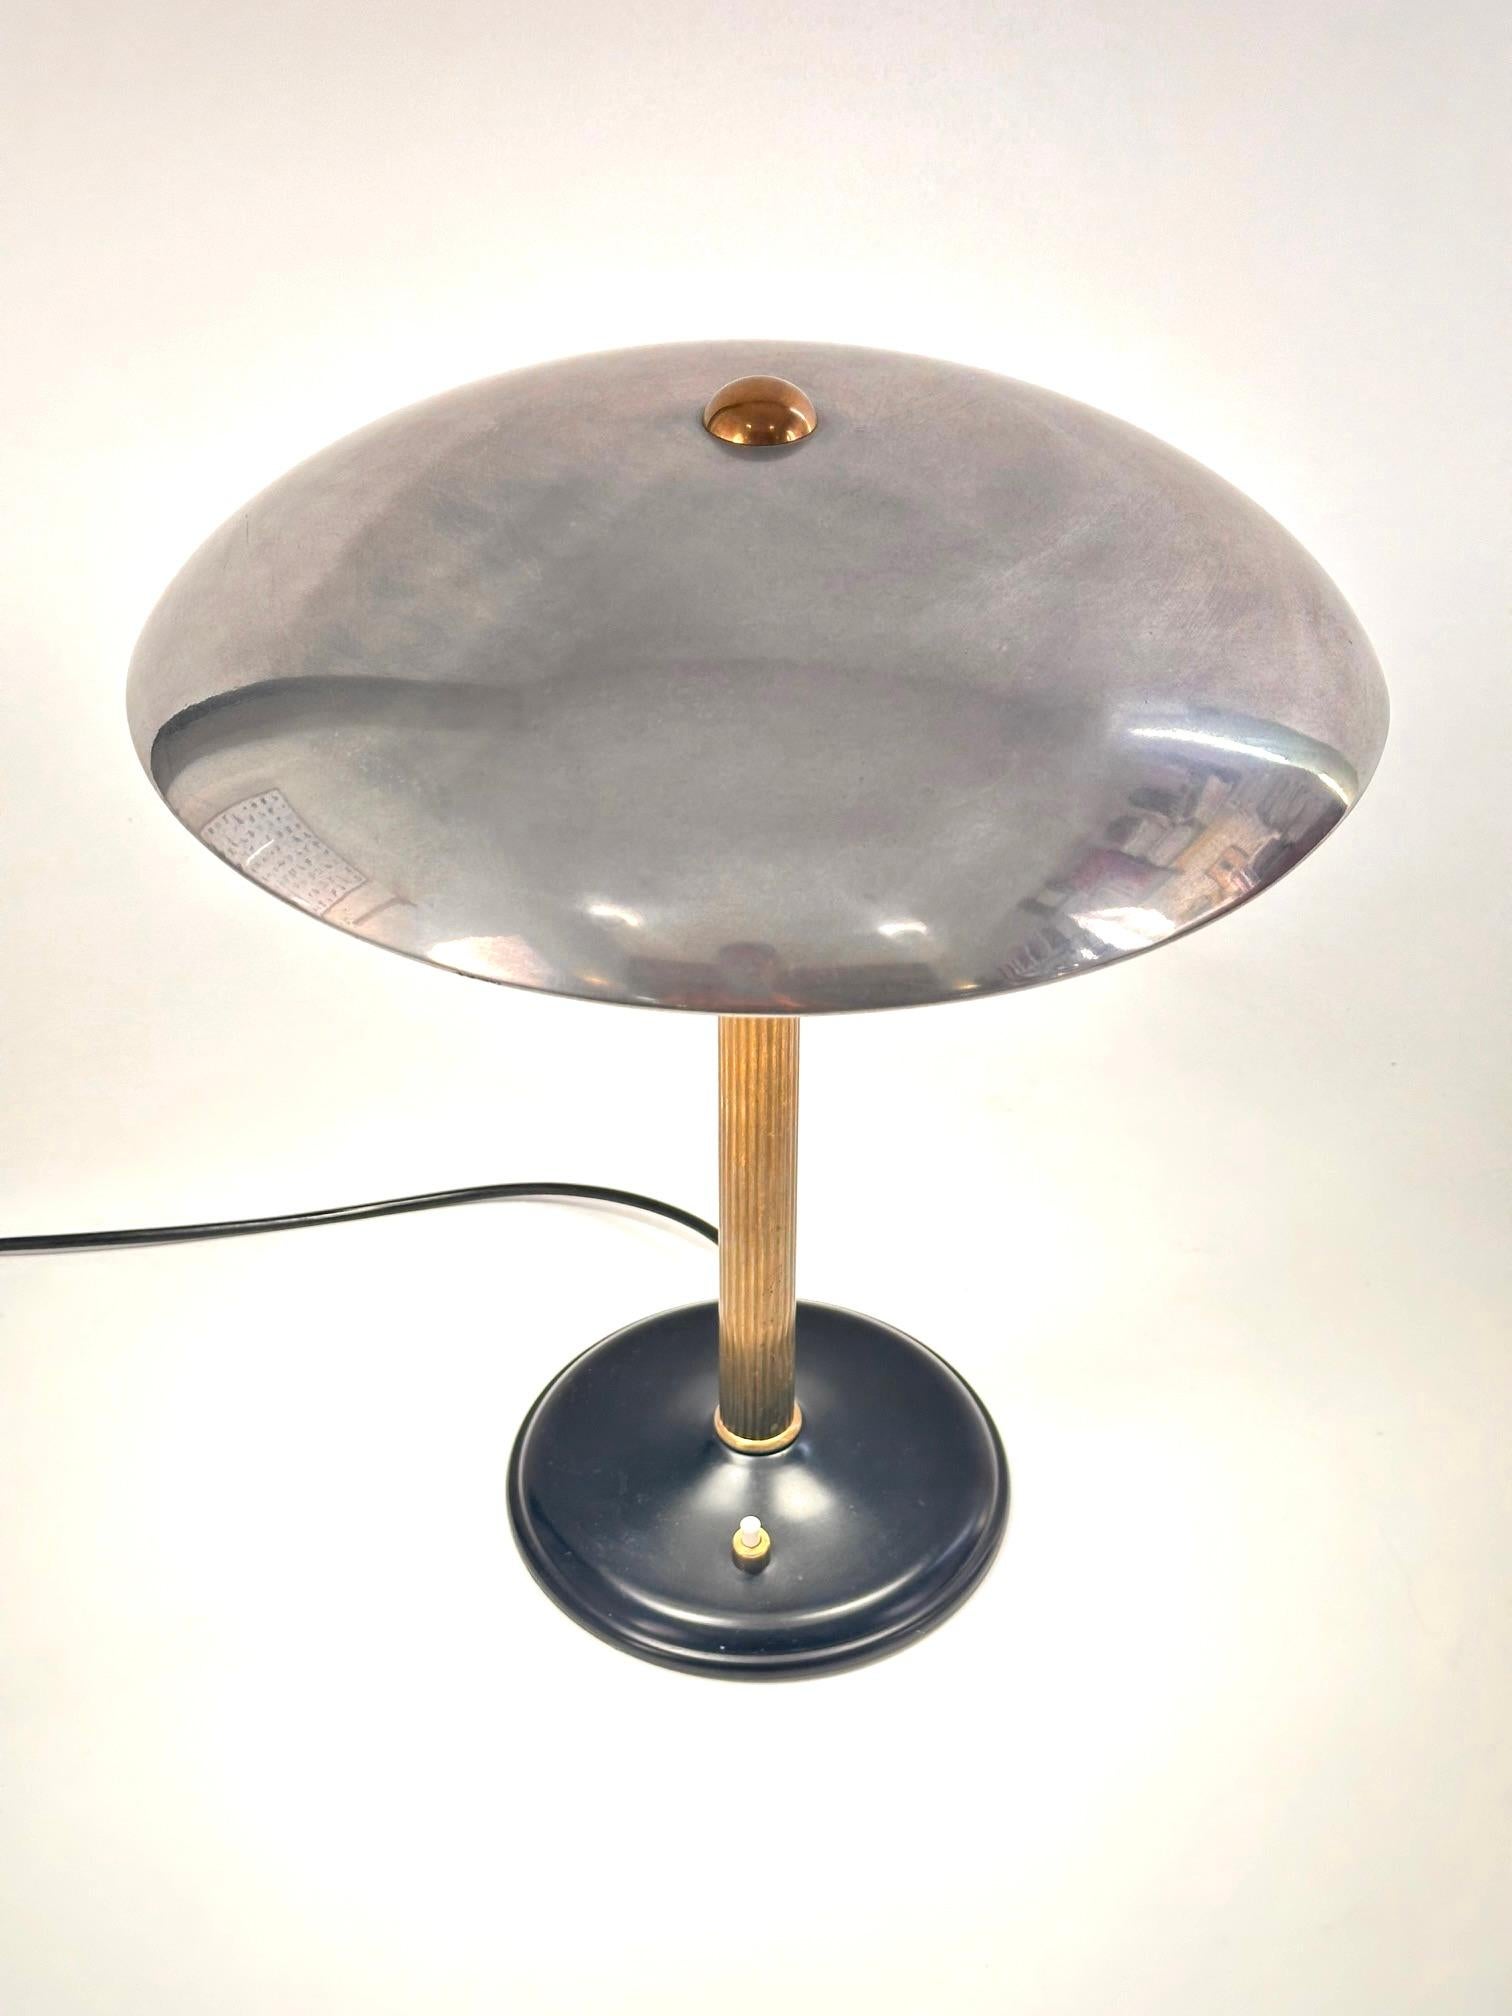 A MidCentury Italian table lamp.Metal frame, Chromed shaft and black enemeled base.Excellent condition.Free shipping